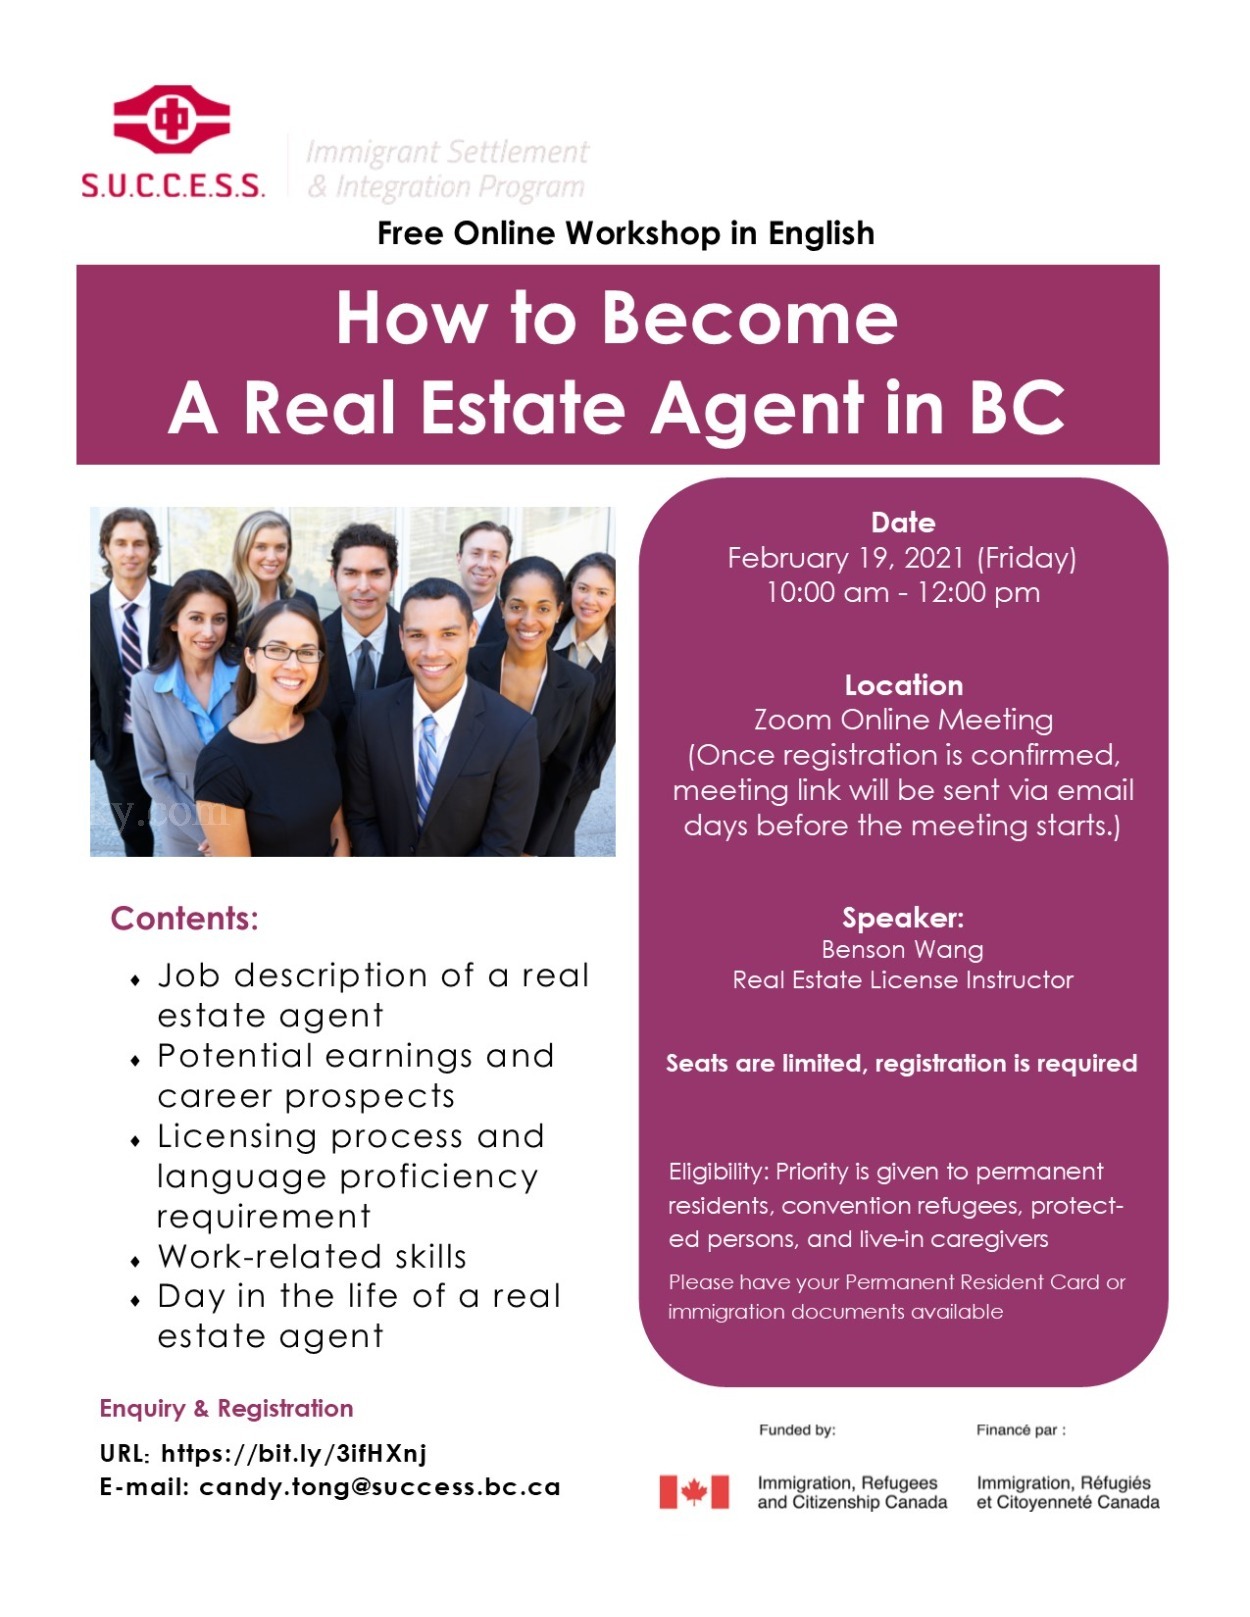 210204101115_nar - How to Become a Real Estate Agent in BC - Candy(final).jpg